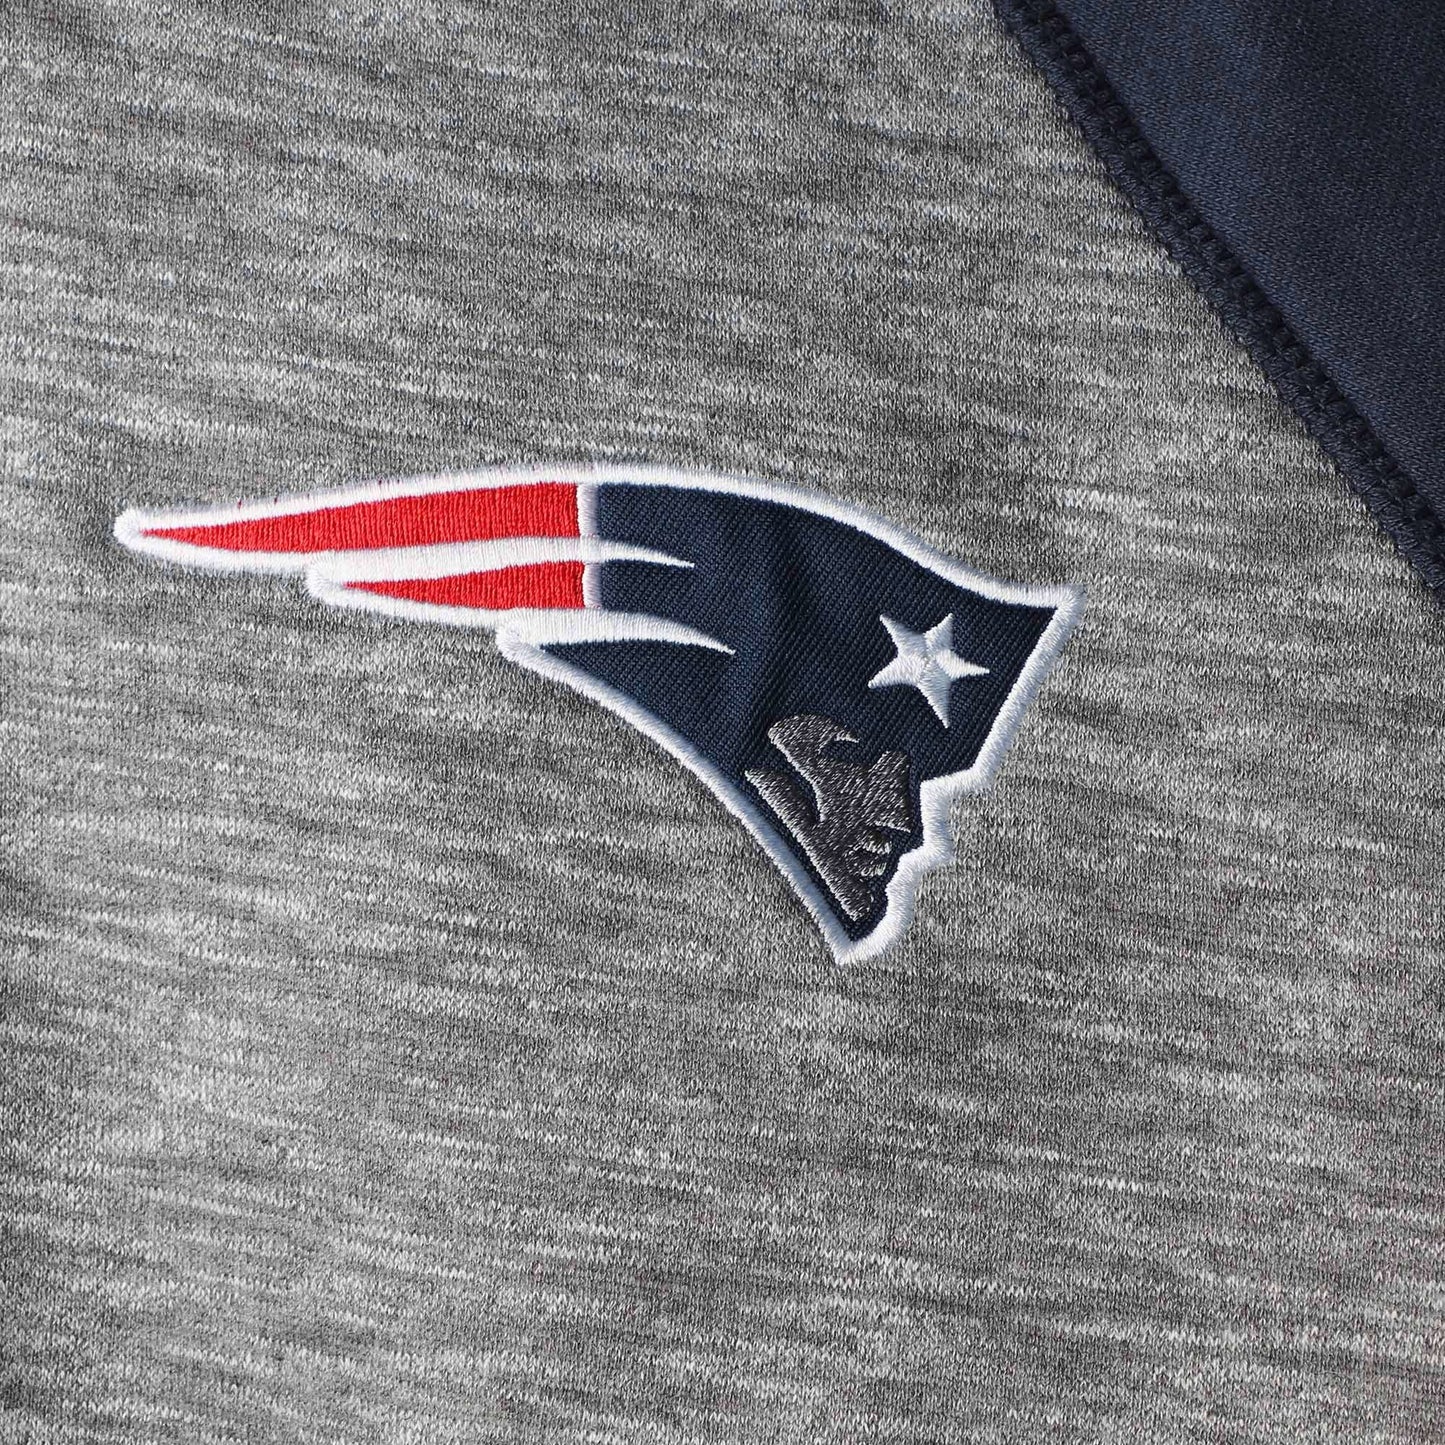 New England Patriots Heathered Gray/Blue Turning Point Hooded Jacket by G-III